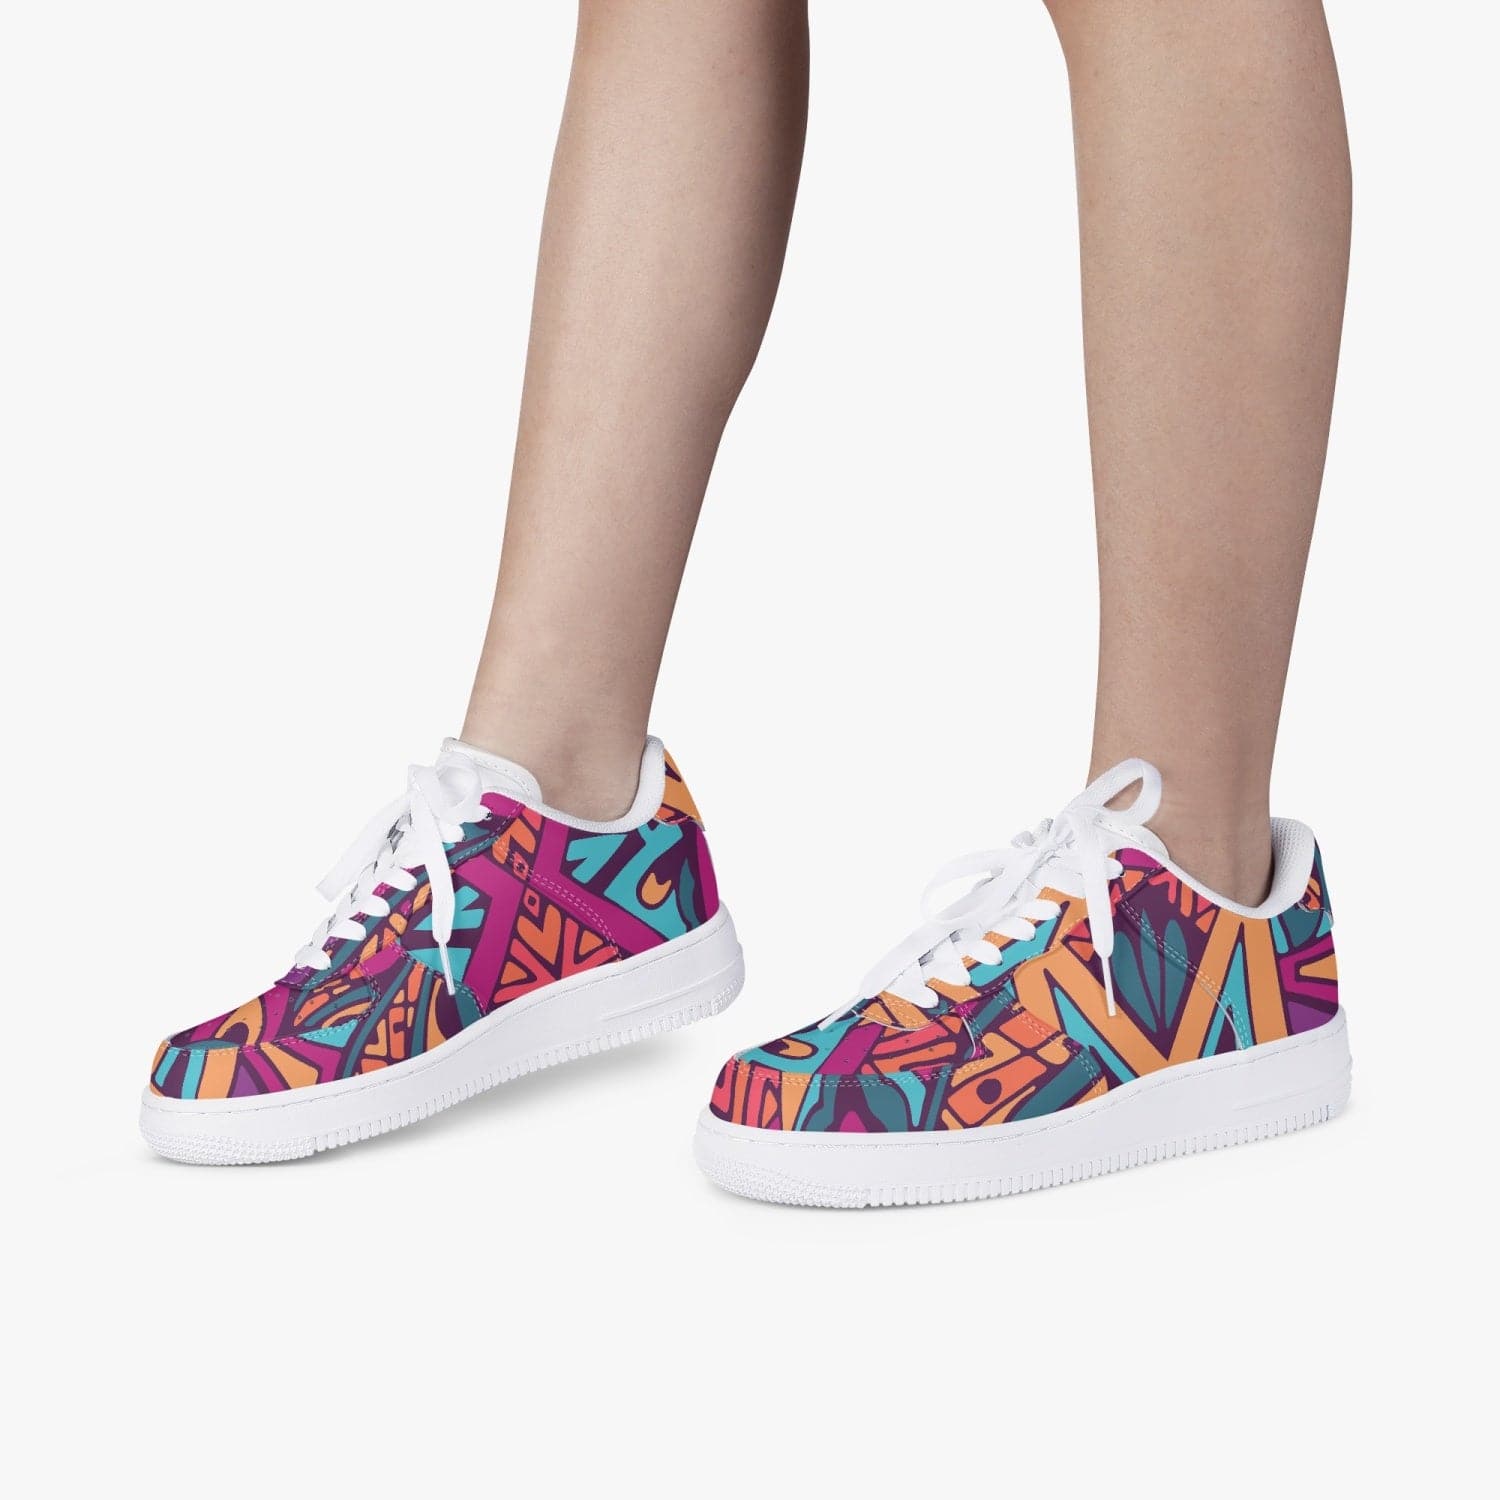 Colorful Etnic Bow, Trendy design 2022 New Low-Top Leather Sports Sneakers, by Sensus Studio